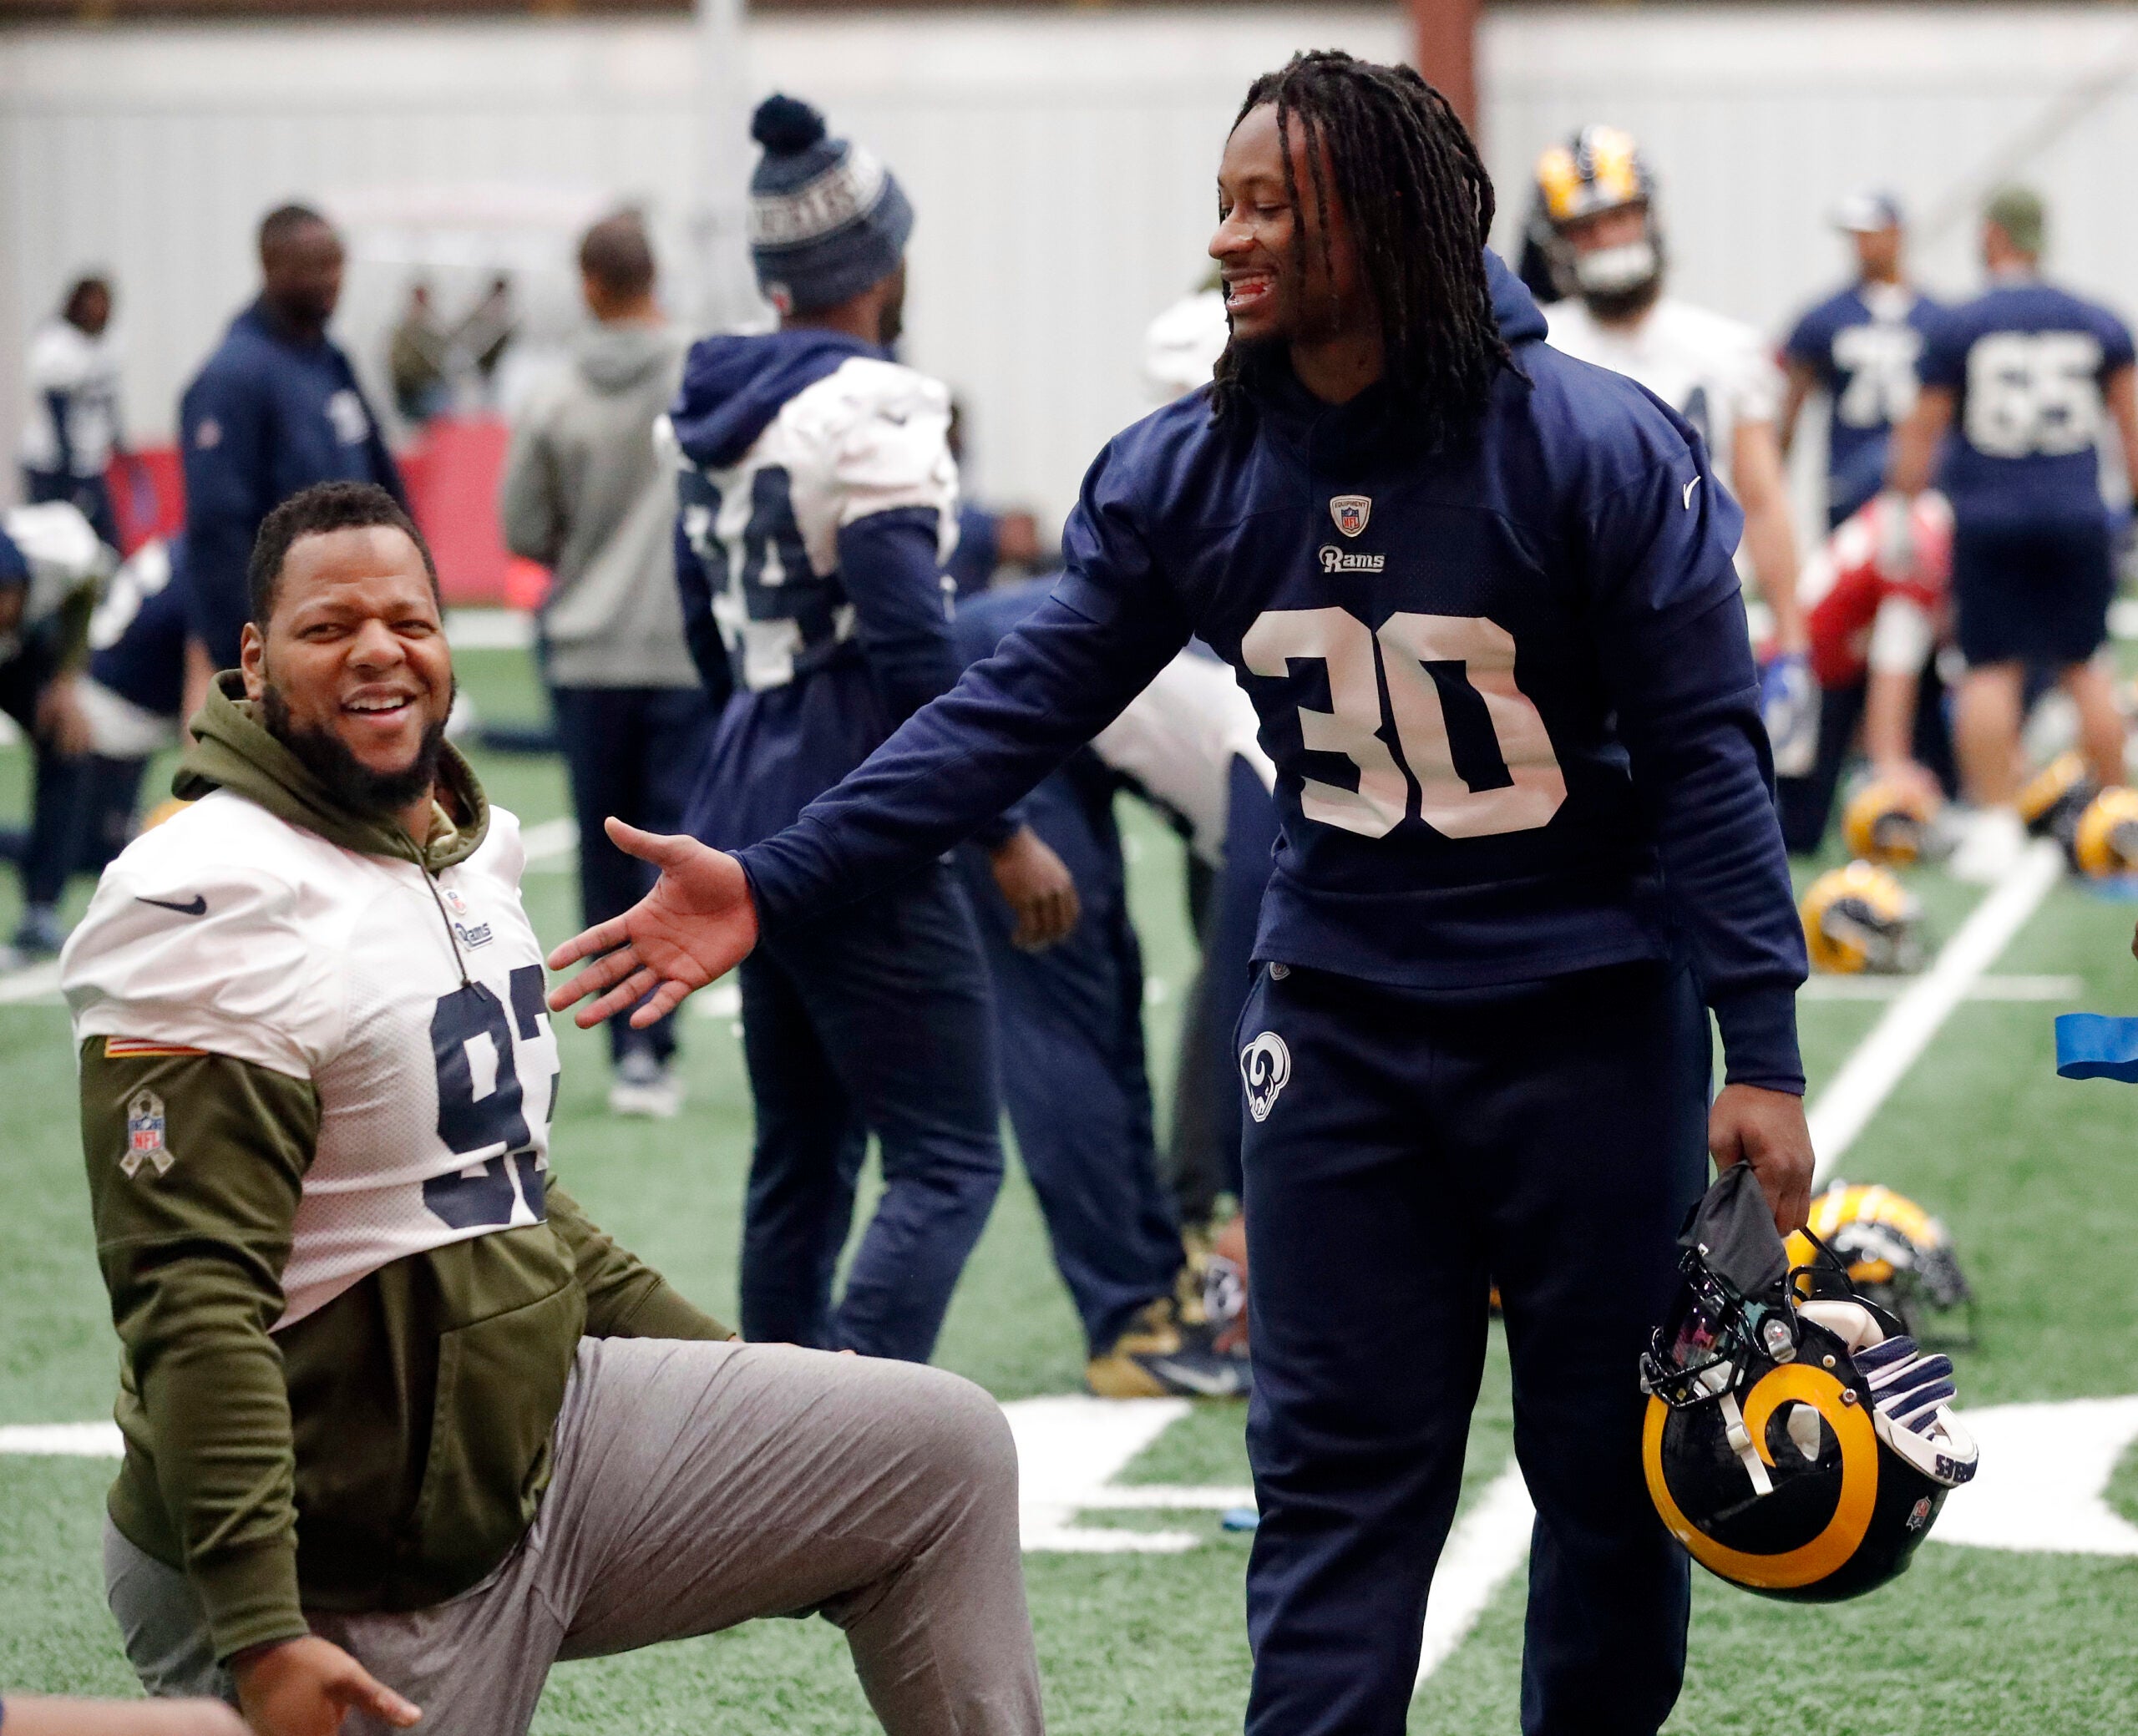 Aaron Donald, Ndamukong Suh, and the Rams defense believe they